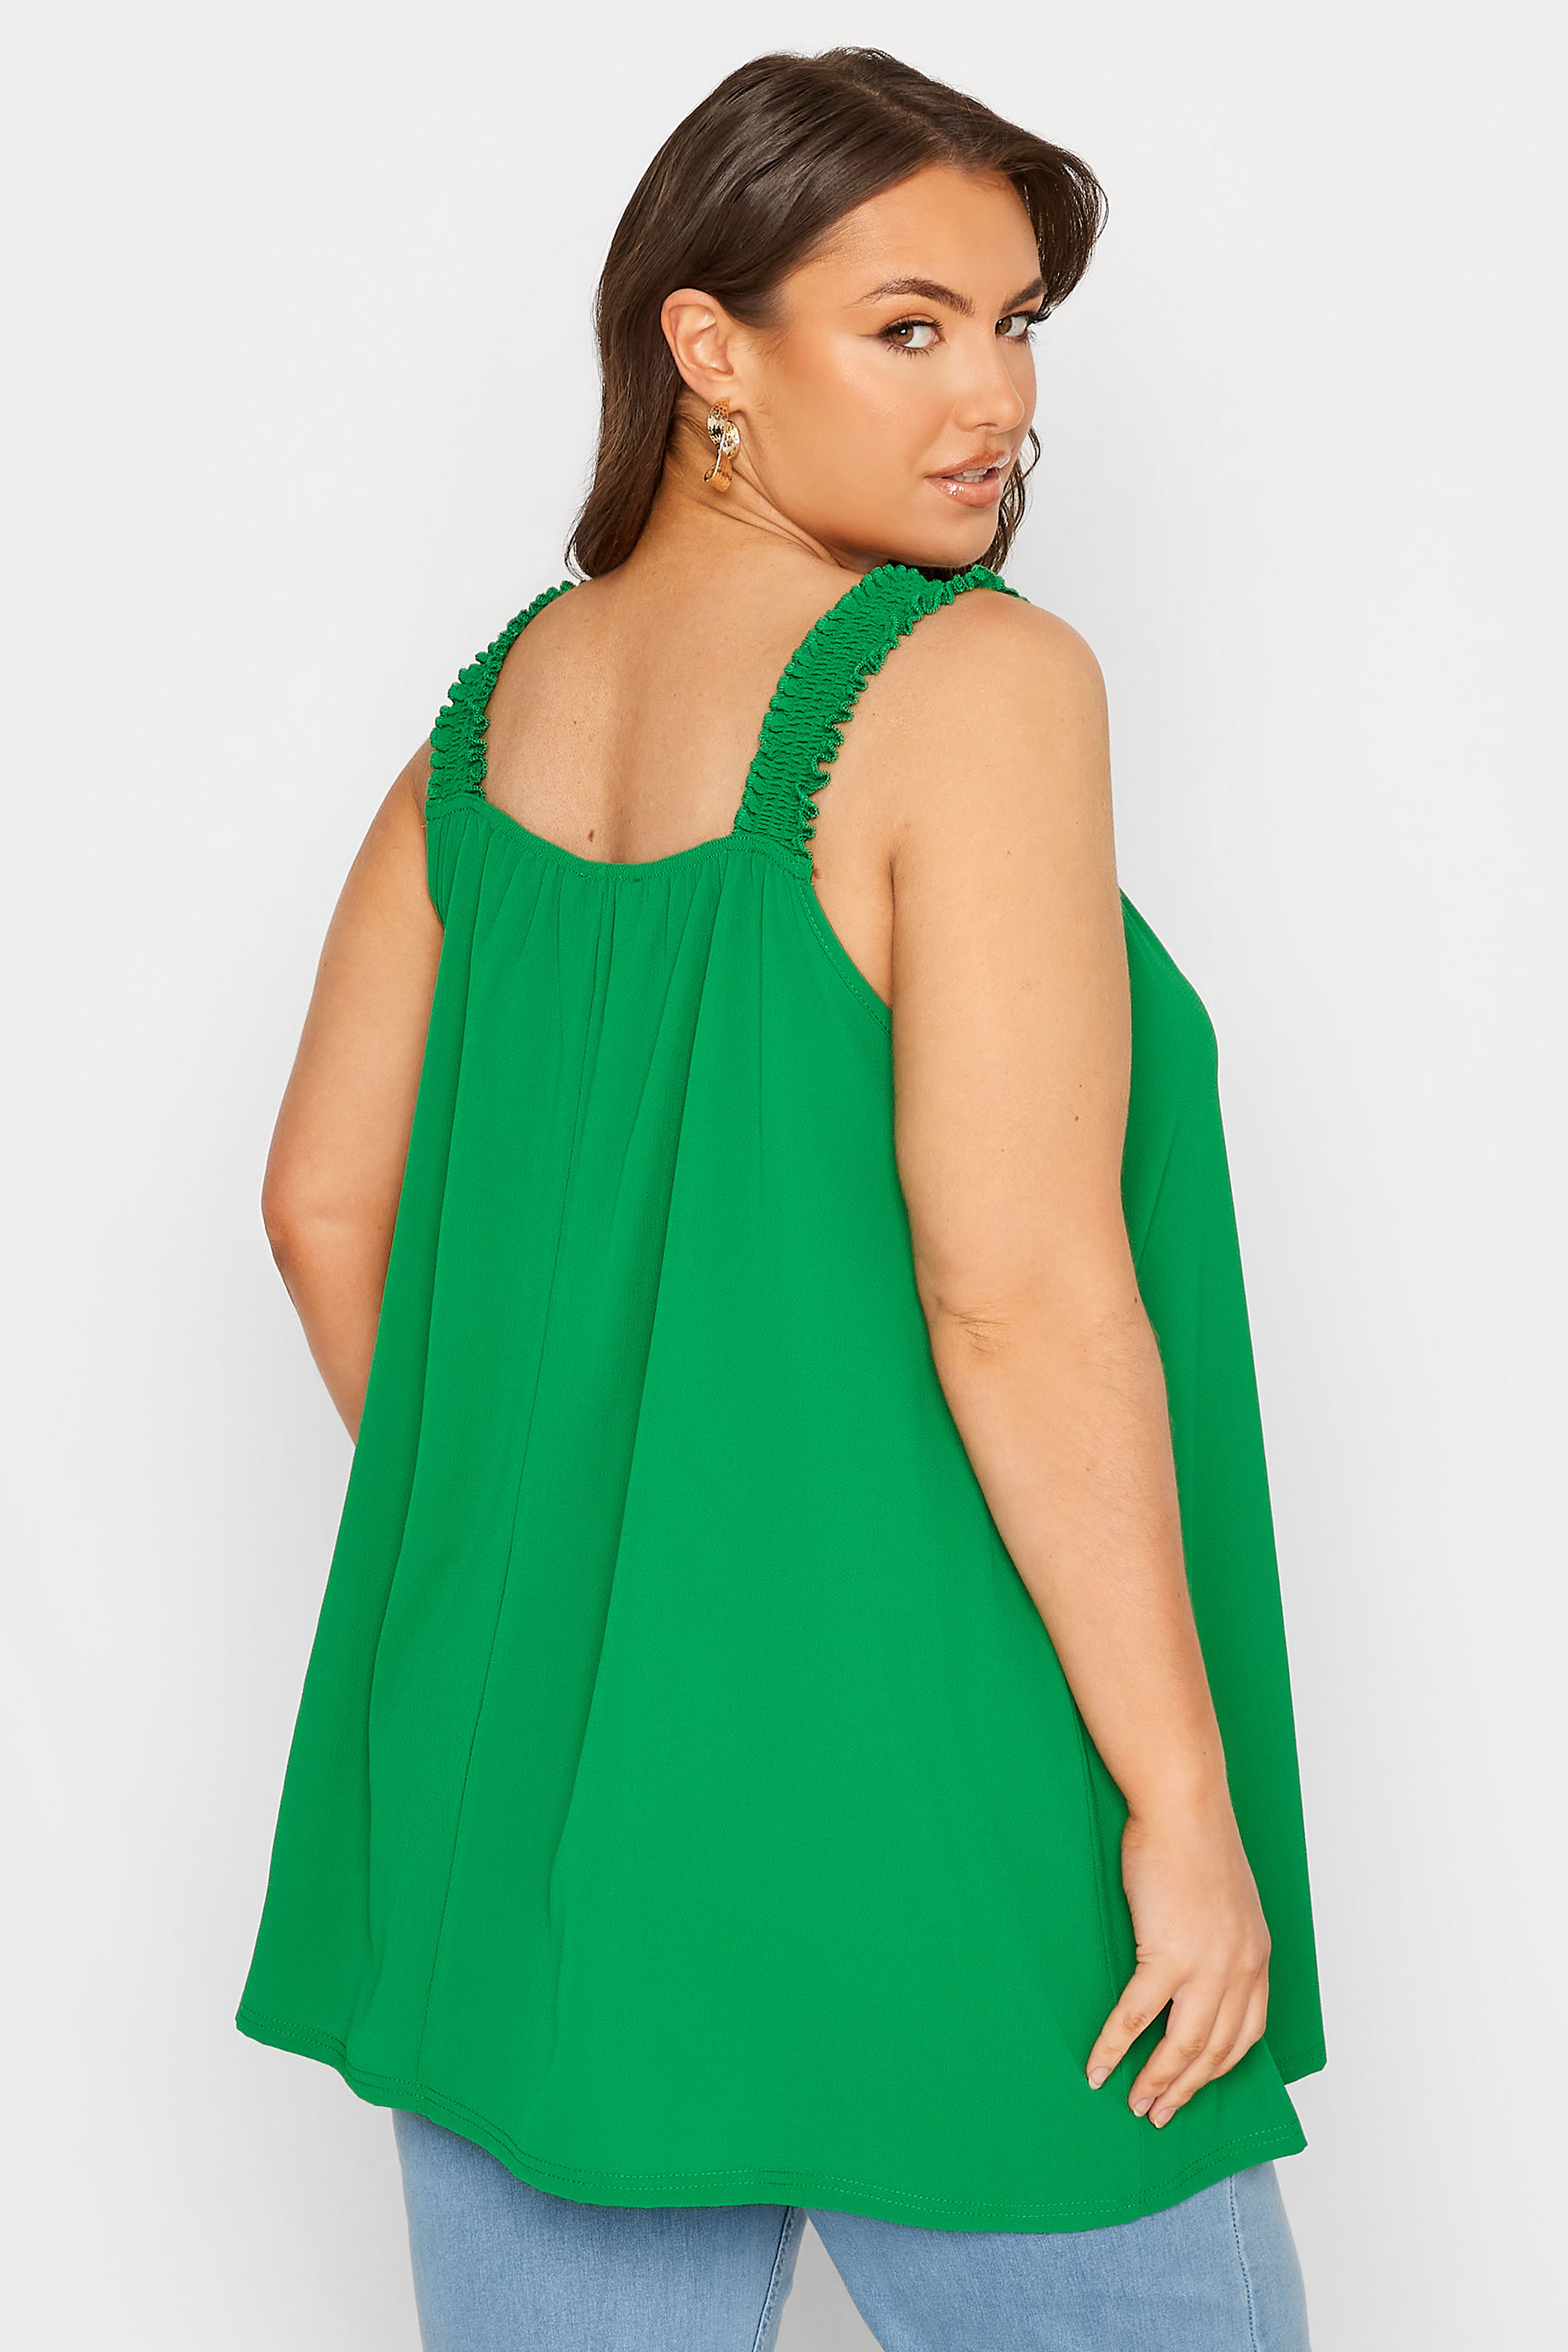 LIMITED COLLECTION Plus Size Green Shirred Strap Vest Top | Yours Clothing  3